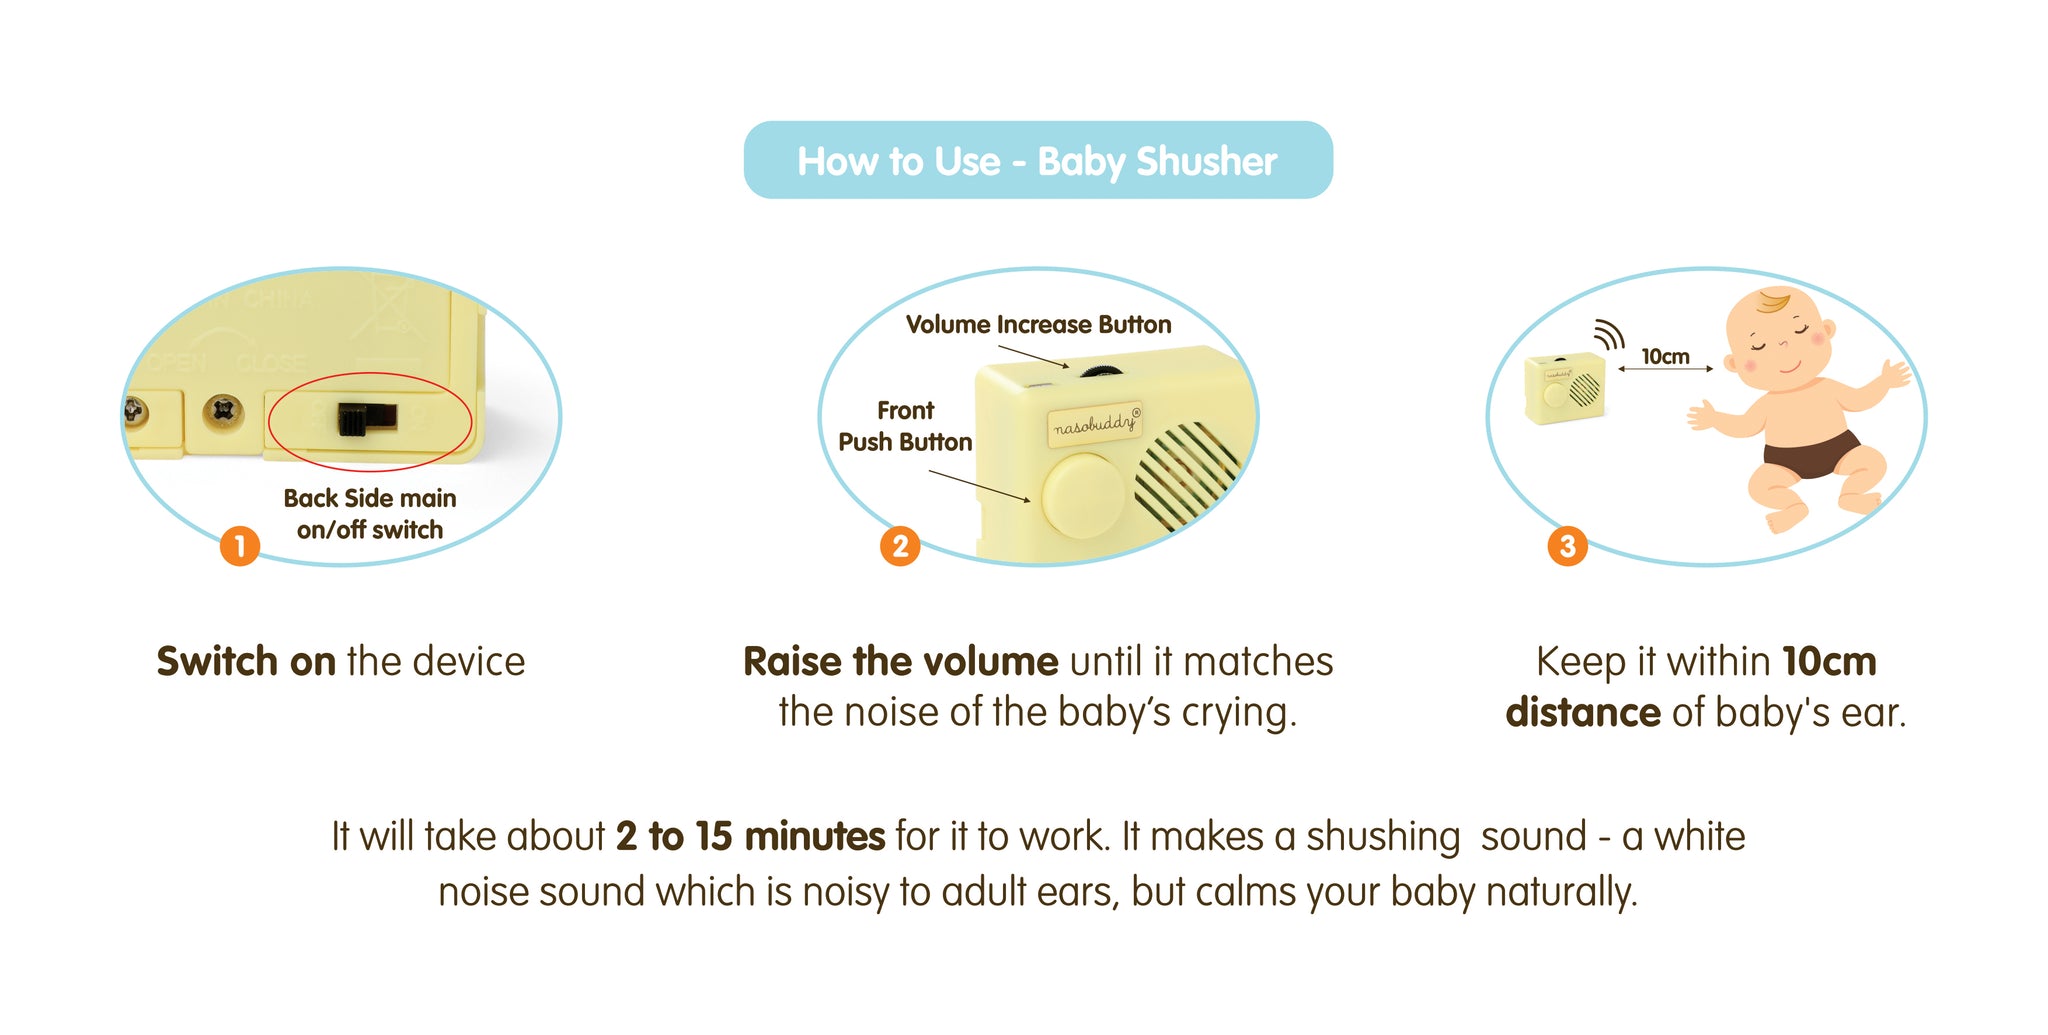 User Guide - How to Use Baby Shusher